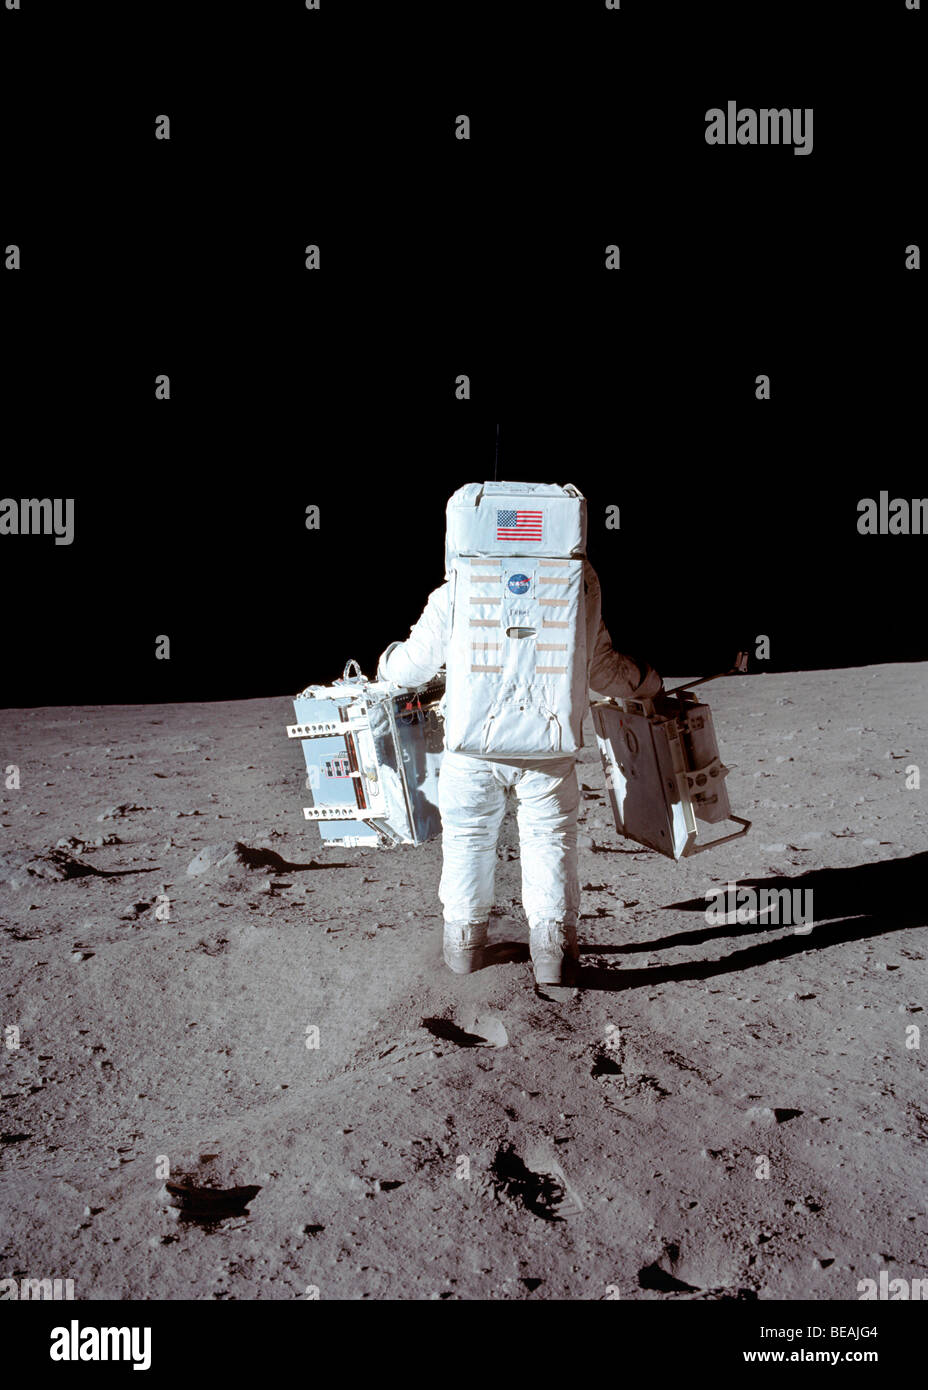 Buzz Aldrin on the moon carrying scientific equipment. Apollo 11. Optimised and enhanced version of a NASA image. Credit NASA. Stock Photo